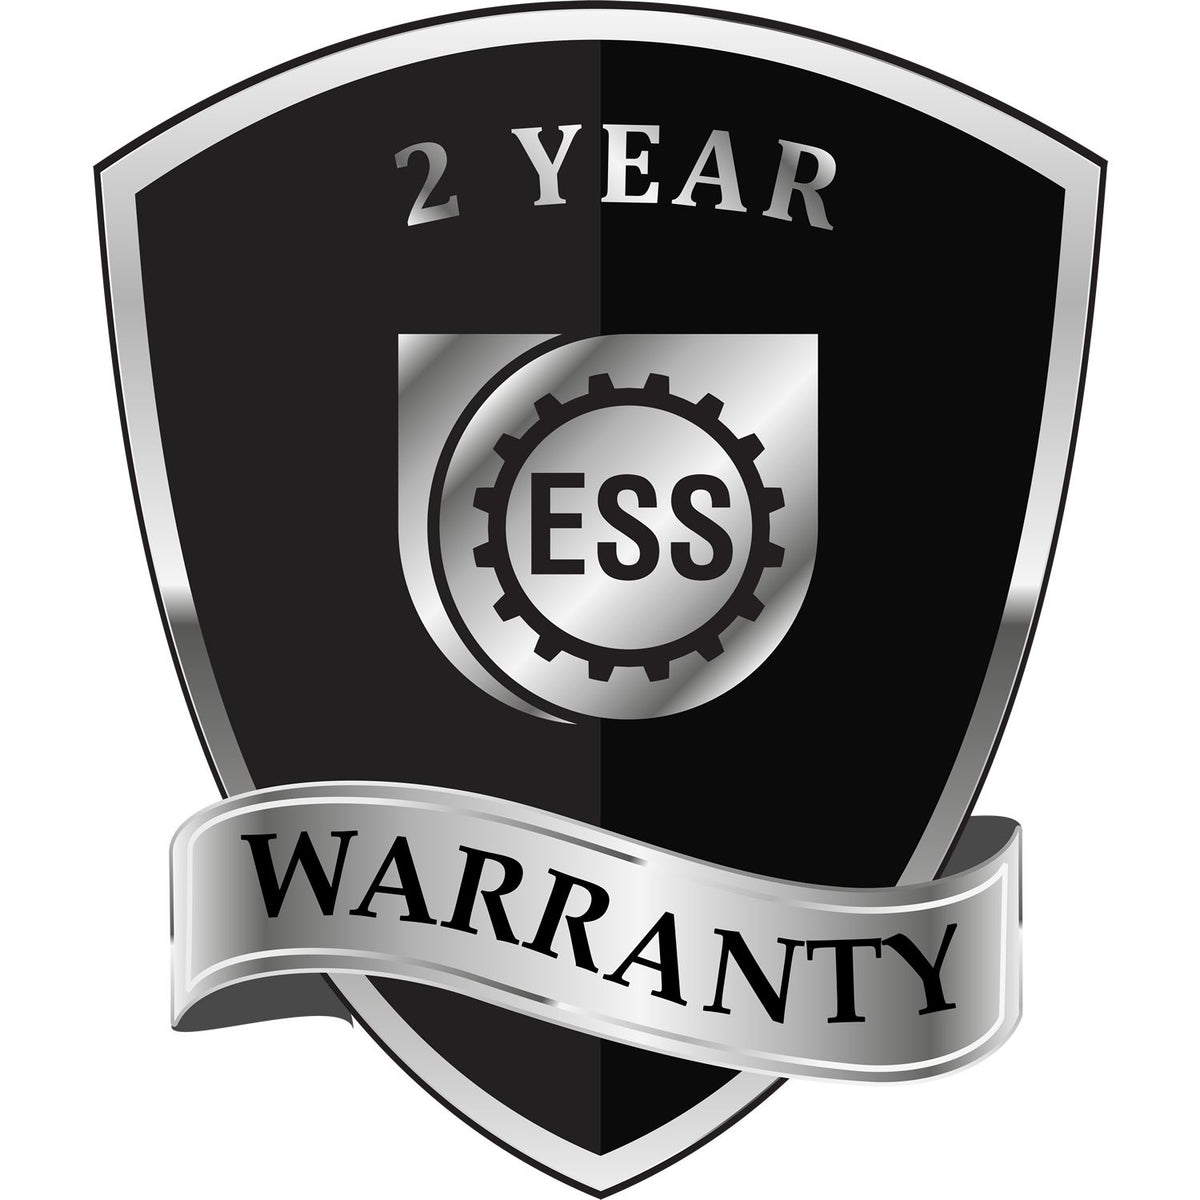 A black and silver badge or emblem showing warranty information for the Heavy Duty Cast Iron Iowa Geologist Seal Embosser